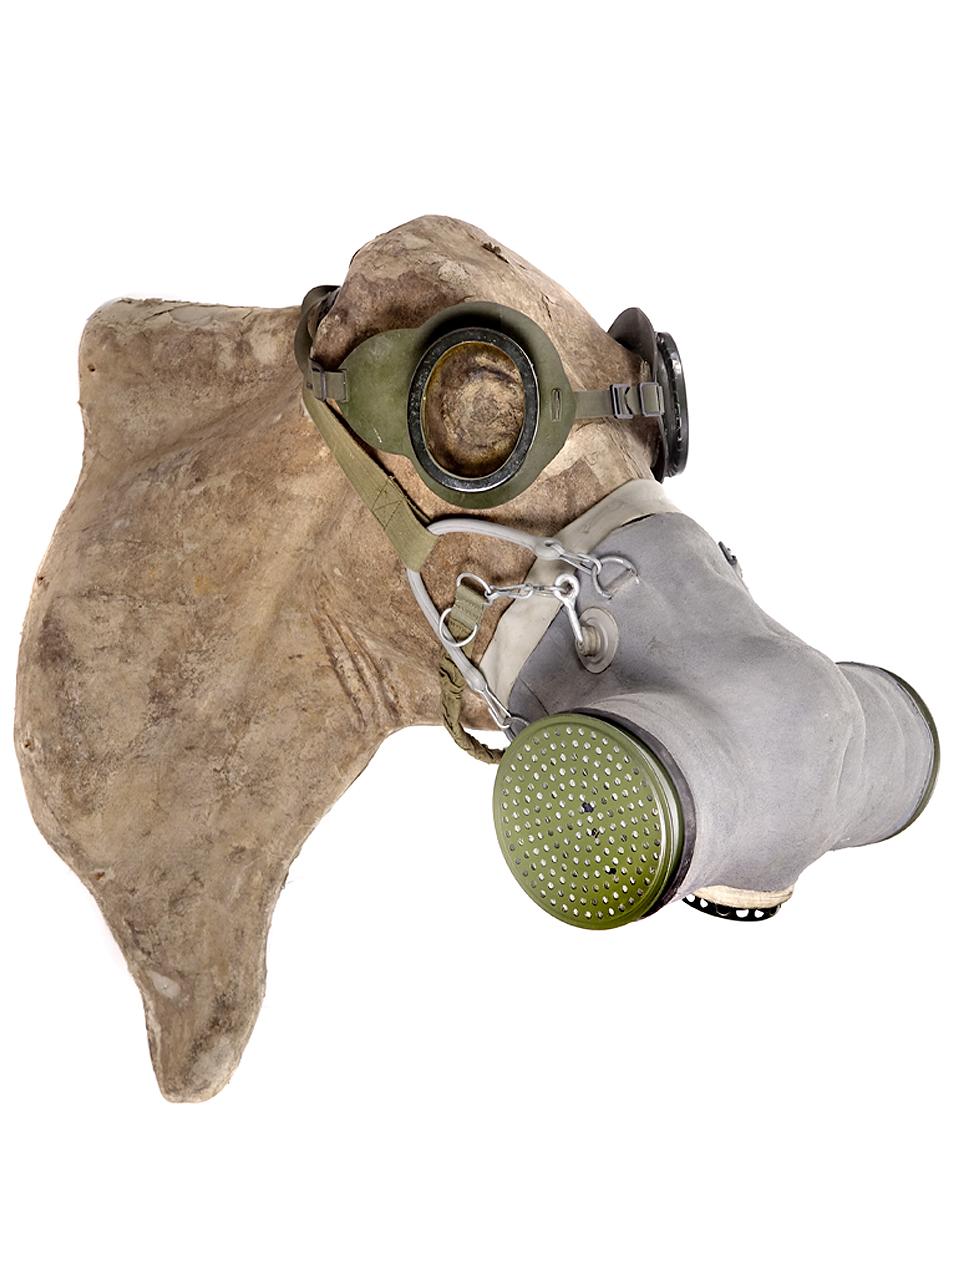 Horse or livestock gas masks were first used during World War I to protect horses from harmful chemical agents. Horses were the primary mode of transporting men and material to war zones and needed protection from irritating chemicals like chlorine